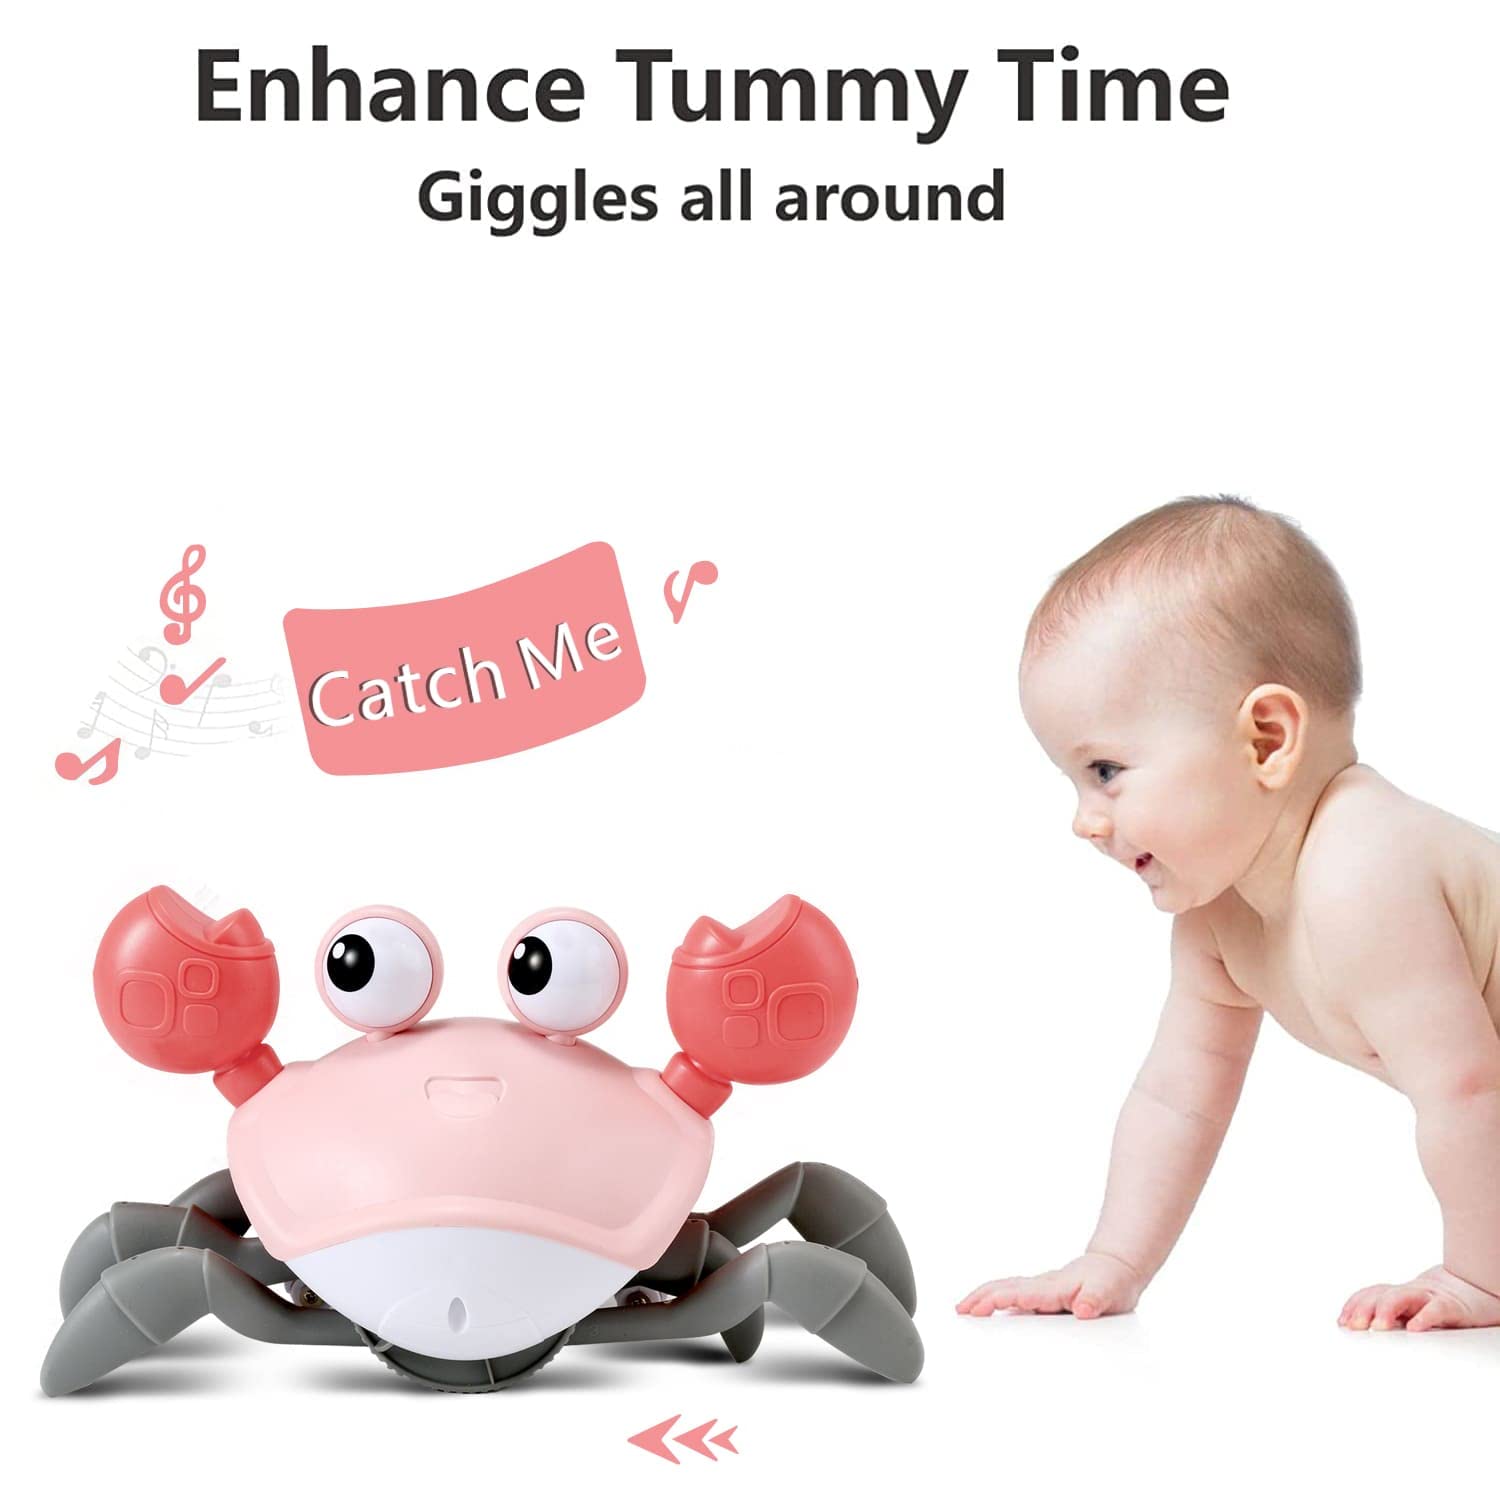 Baby Girl Toys Tummy Time: Pink Crawling Crab Babies Montessori Toy 4 5 6 7 8 9 10 11 12 18 Learning 36 Months 3 Year Old Toddler Birthday Gifts Educational Stuff for Infant Walker Girls 1 Essentials